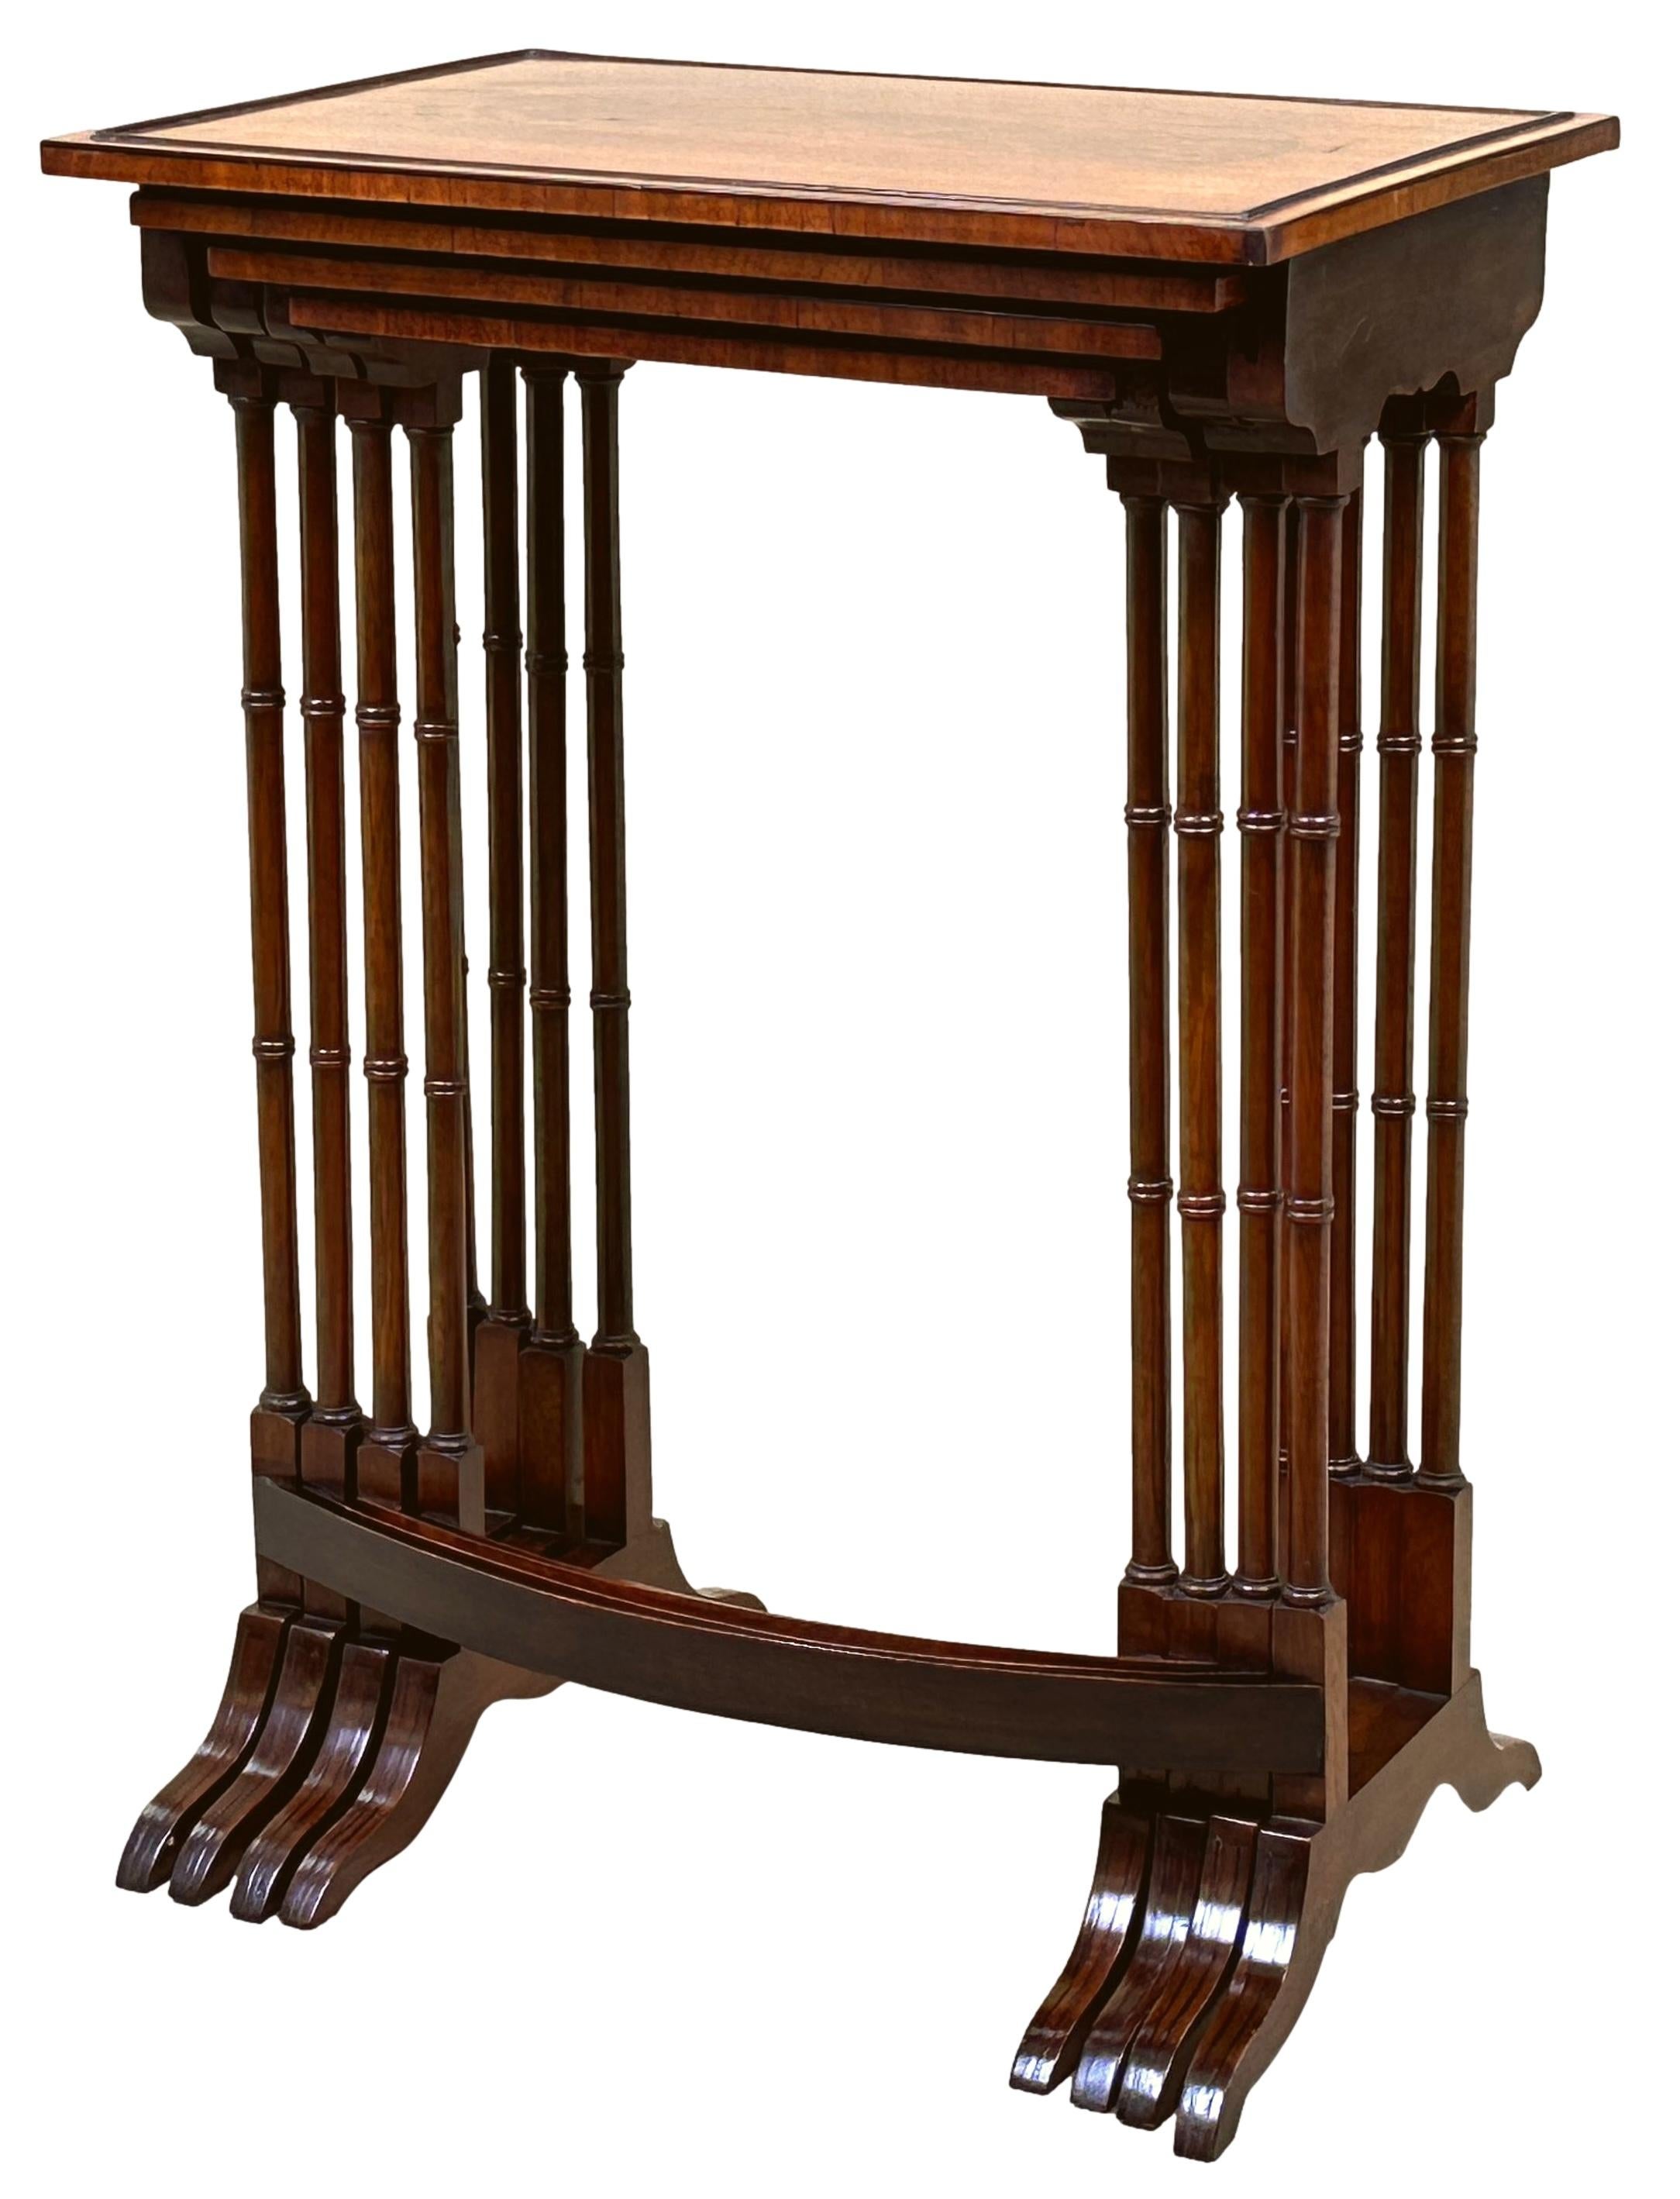 A Fine Quality Late 19th Century Mahogany Quartetto Nest Of Four Coffee Tables, Having Extremely Well Figured Tops With Oval Inlay, Cockbeaded Panelling And Crossbanded Edges, Raised On Elegant Turned Upright Supports With Curved Stretchers And